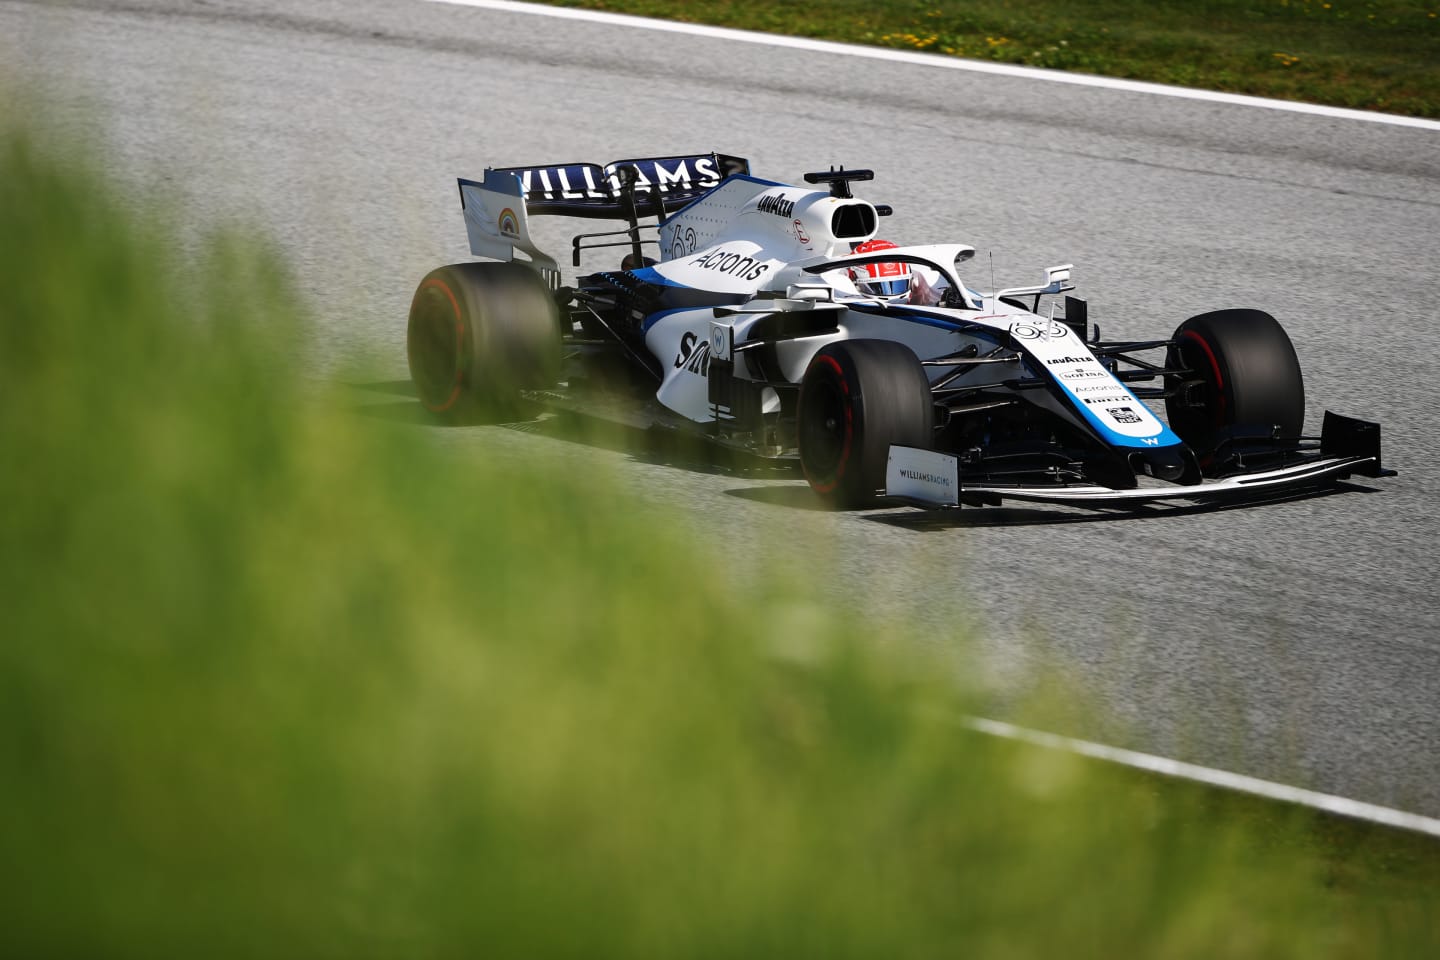 SPIELBERG, AUSTRIA - JULY 10: George Russell of Great Britain driving the (63) Williams Racing FW43 Mercedes on track during practice for the F1 Grand Prix of Styria at Red Bull Ring on July 10, 2020 in Spielberg, Austria. (Photo by Bryn Lennon/Getty Images)